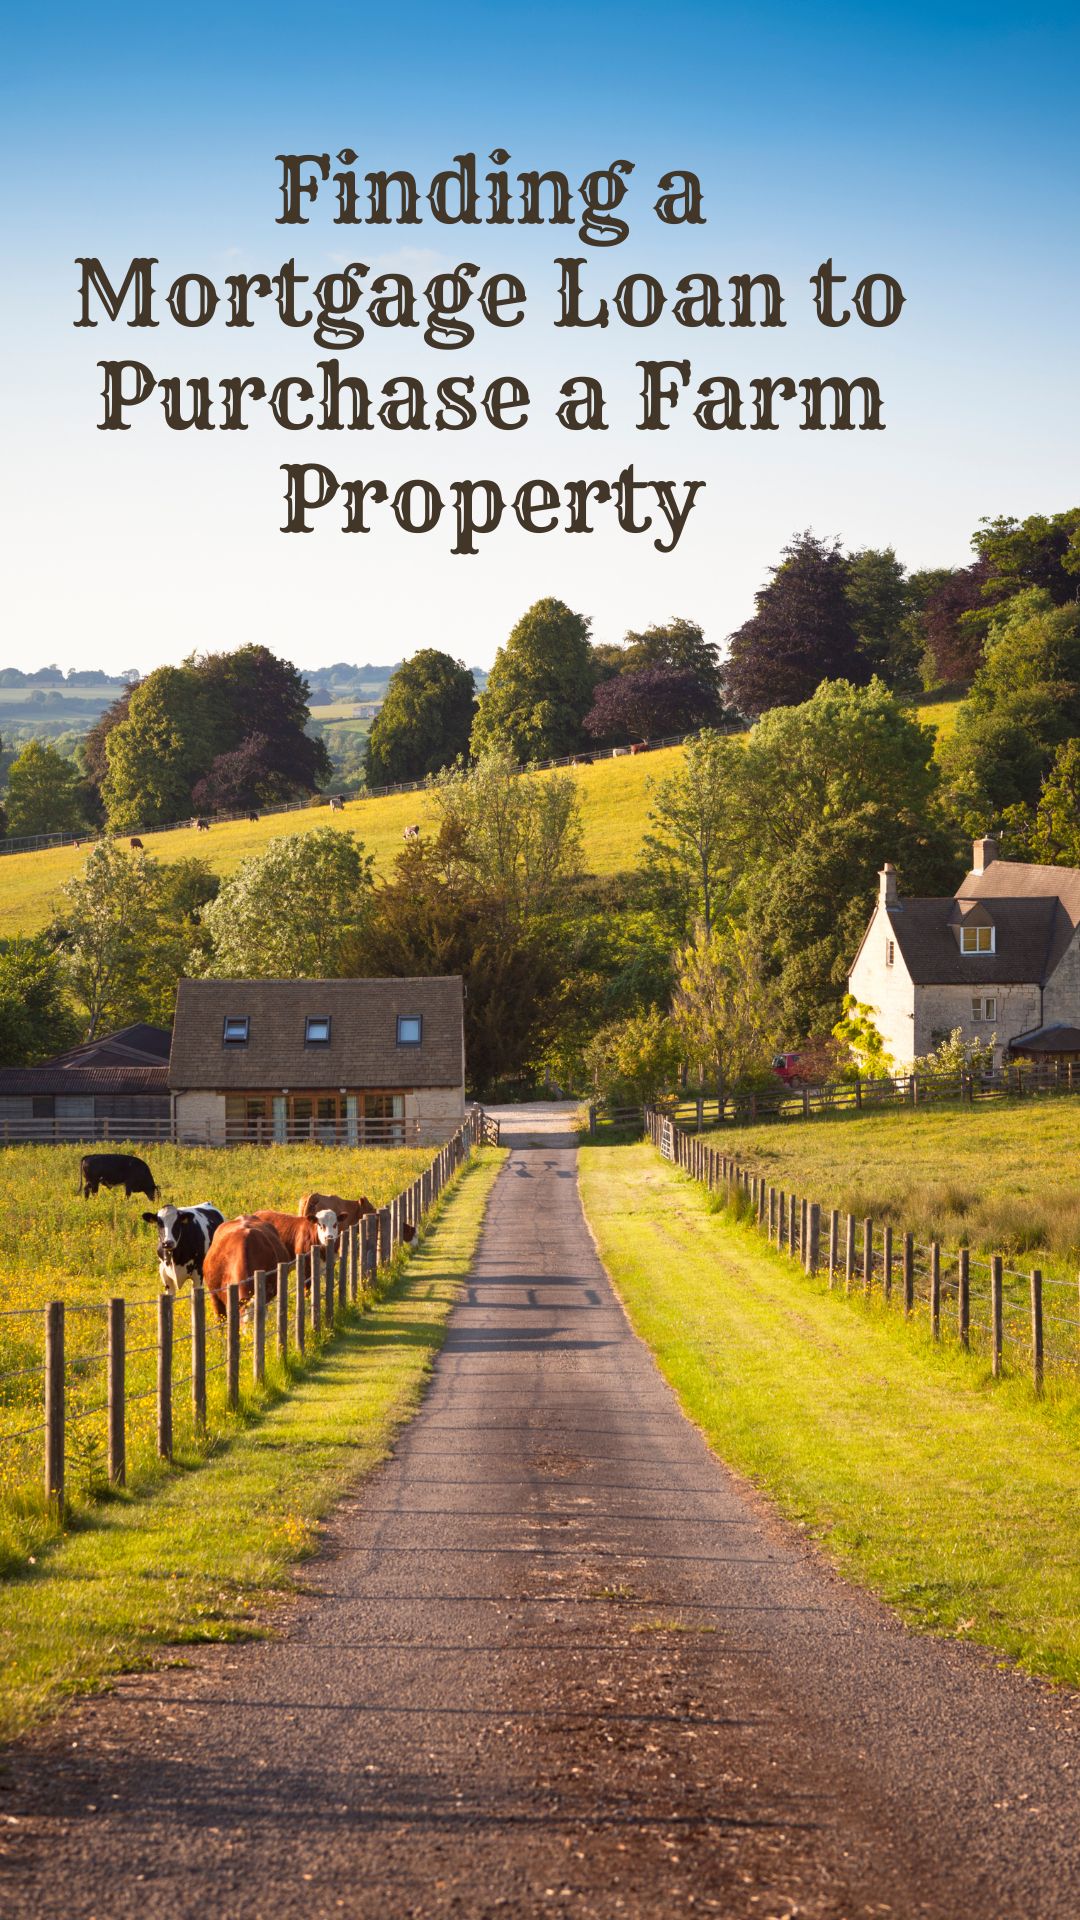 Finding a Mortgage Loan to Purchase a Farm Property